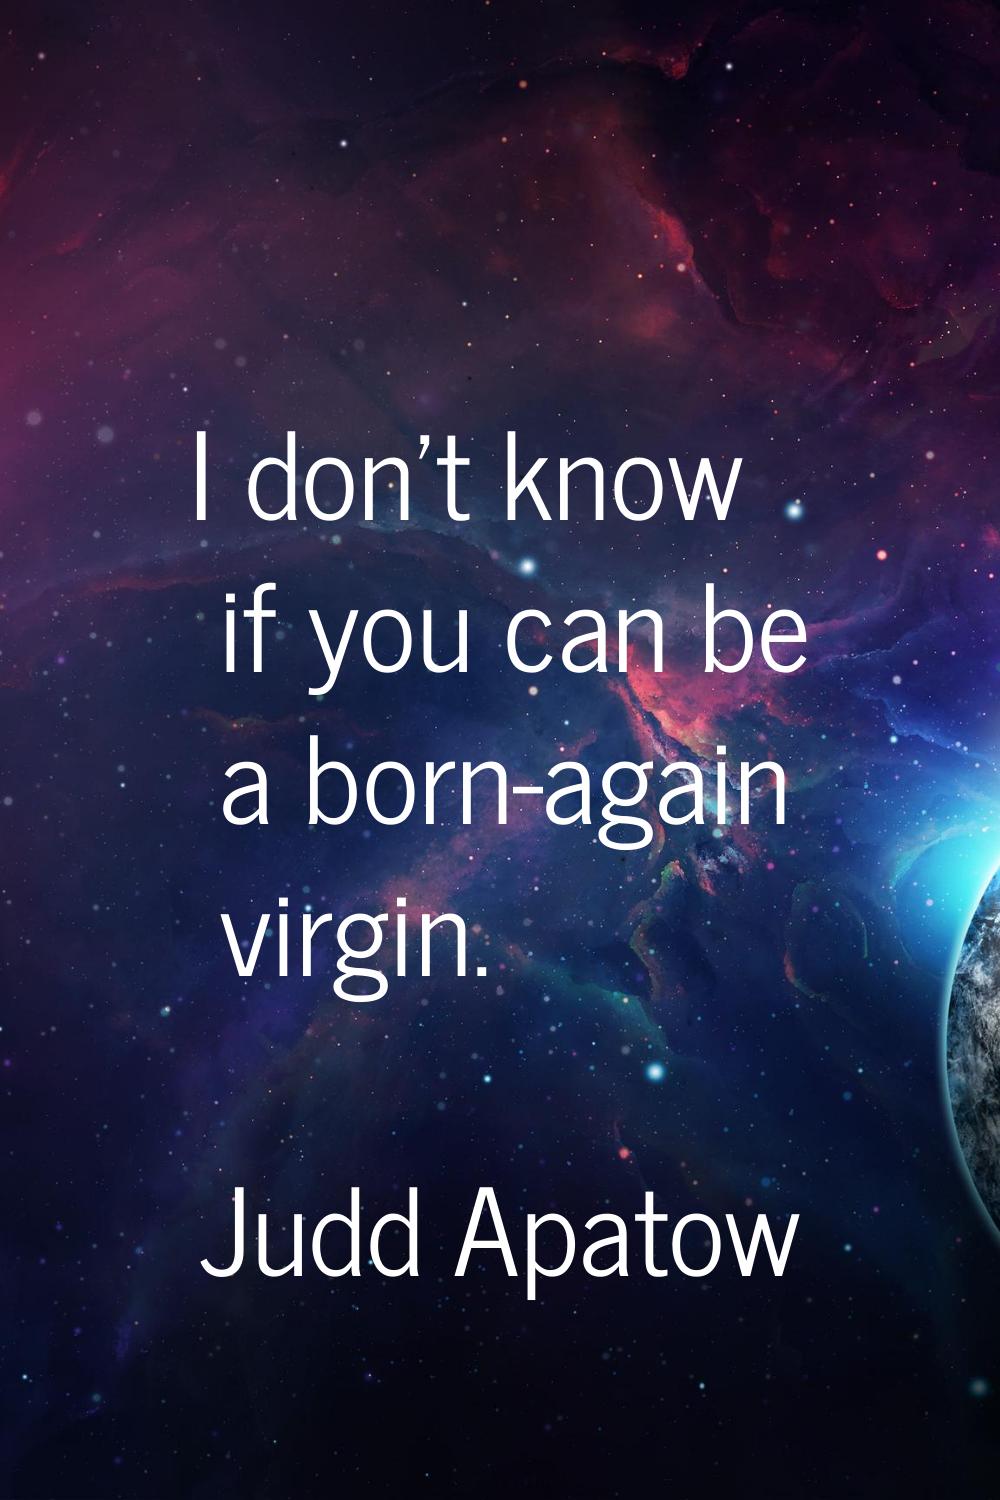 I don't know if you can be a born-again virgin.